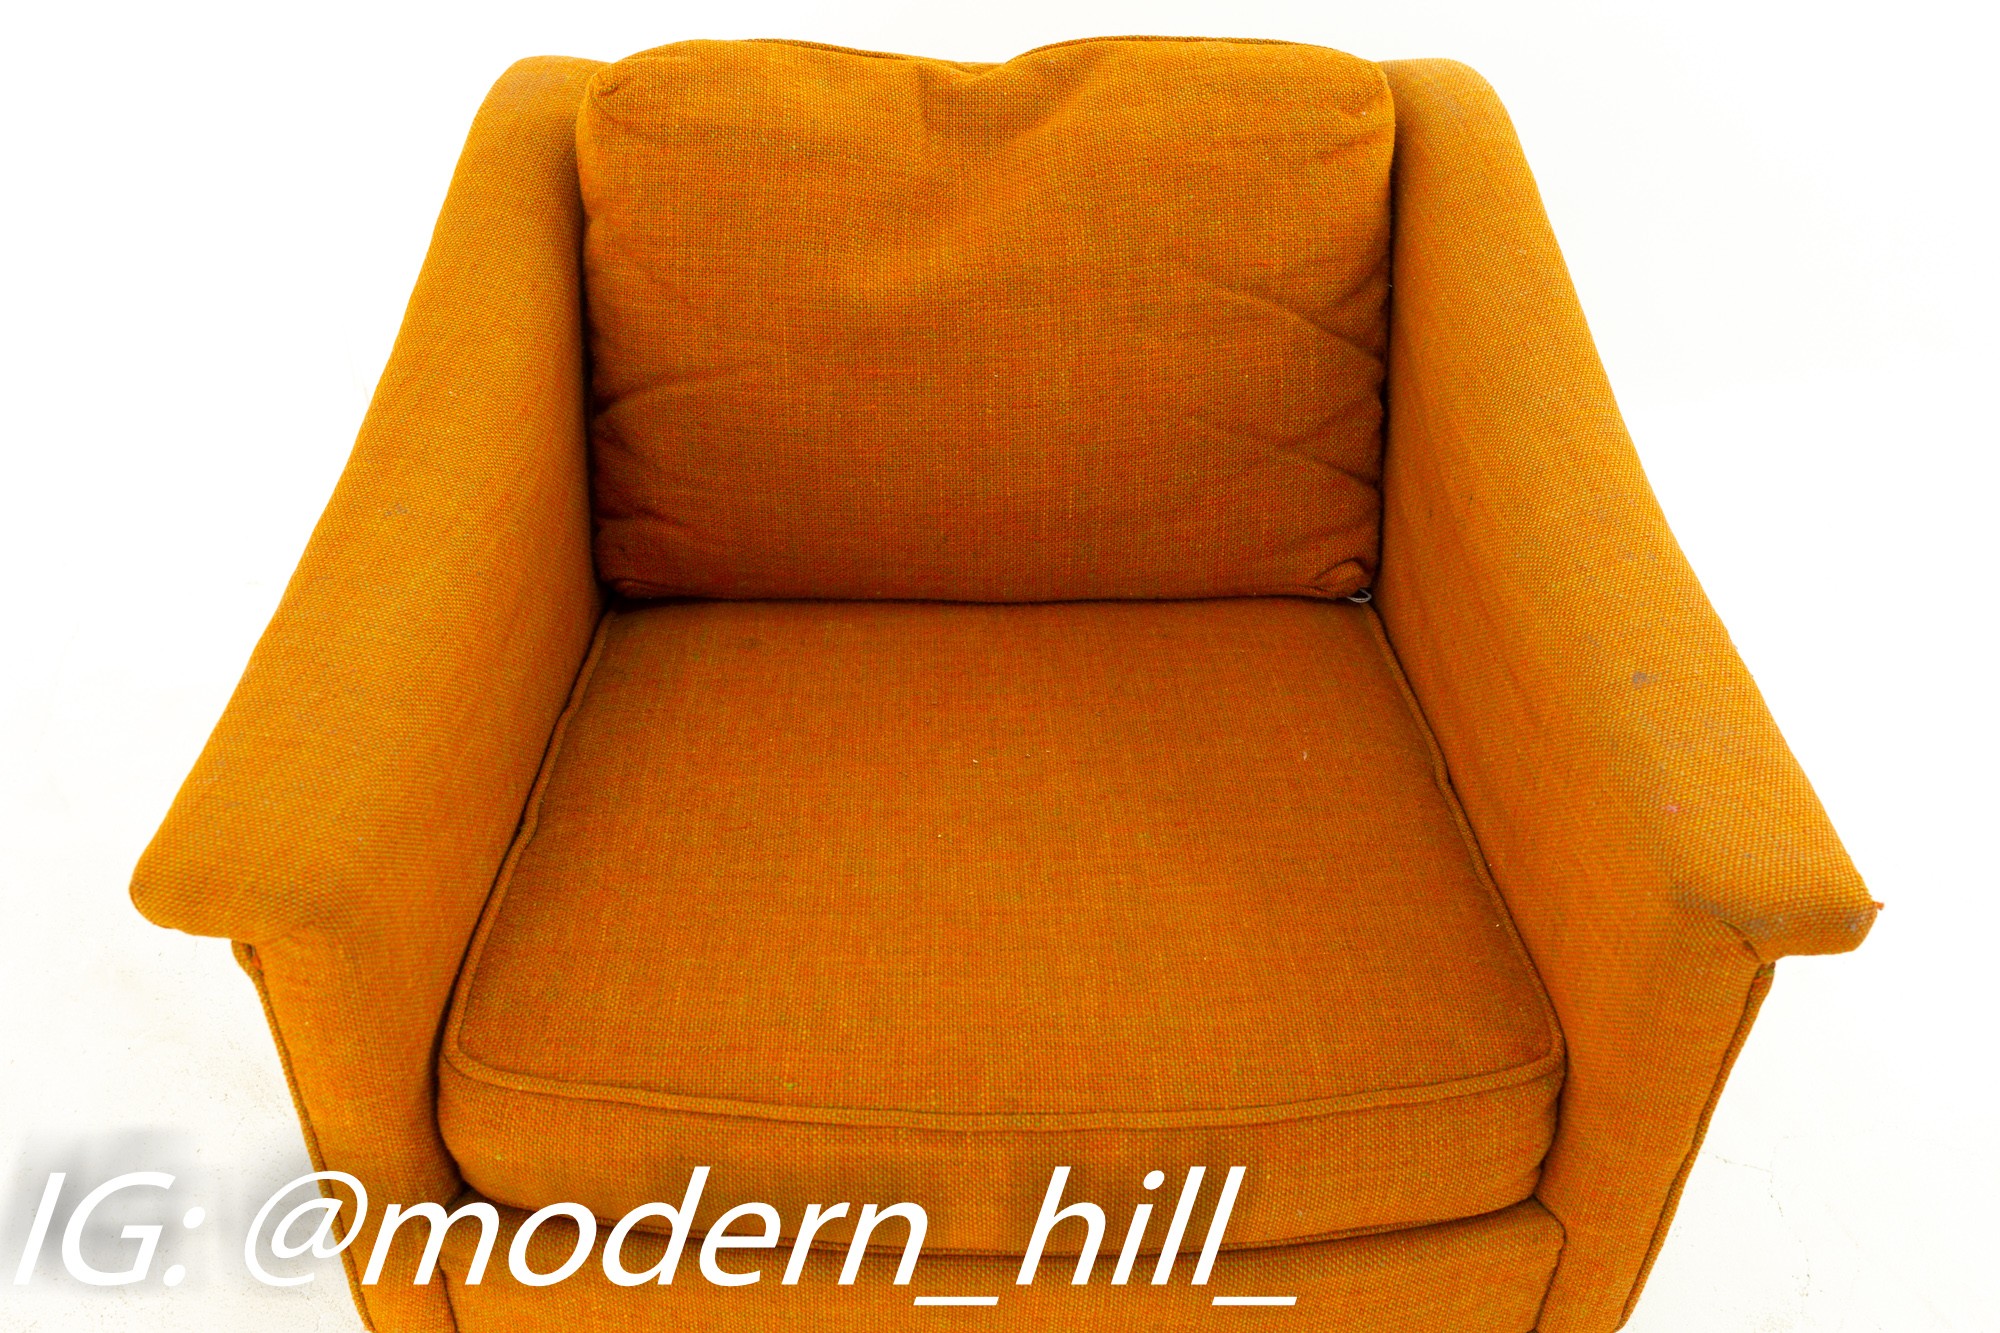 Selig Showcase Mid Century Upholstered Lounge Chair